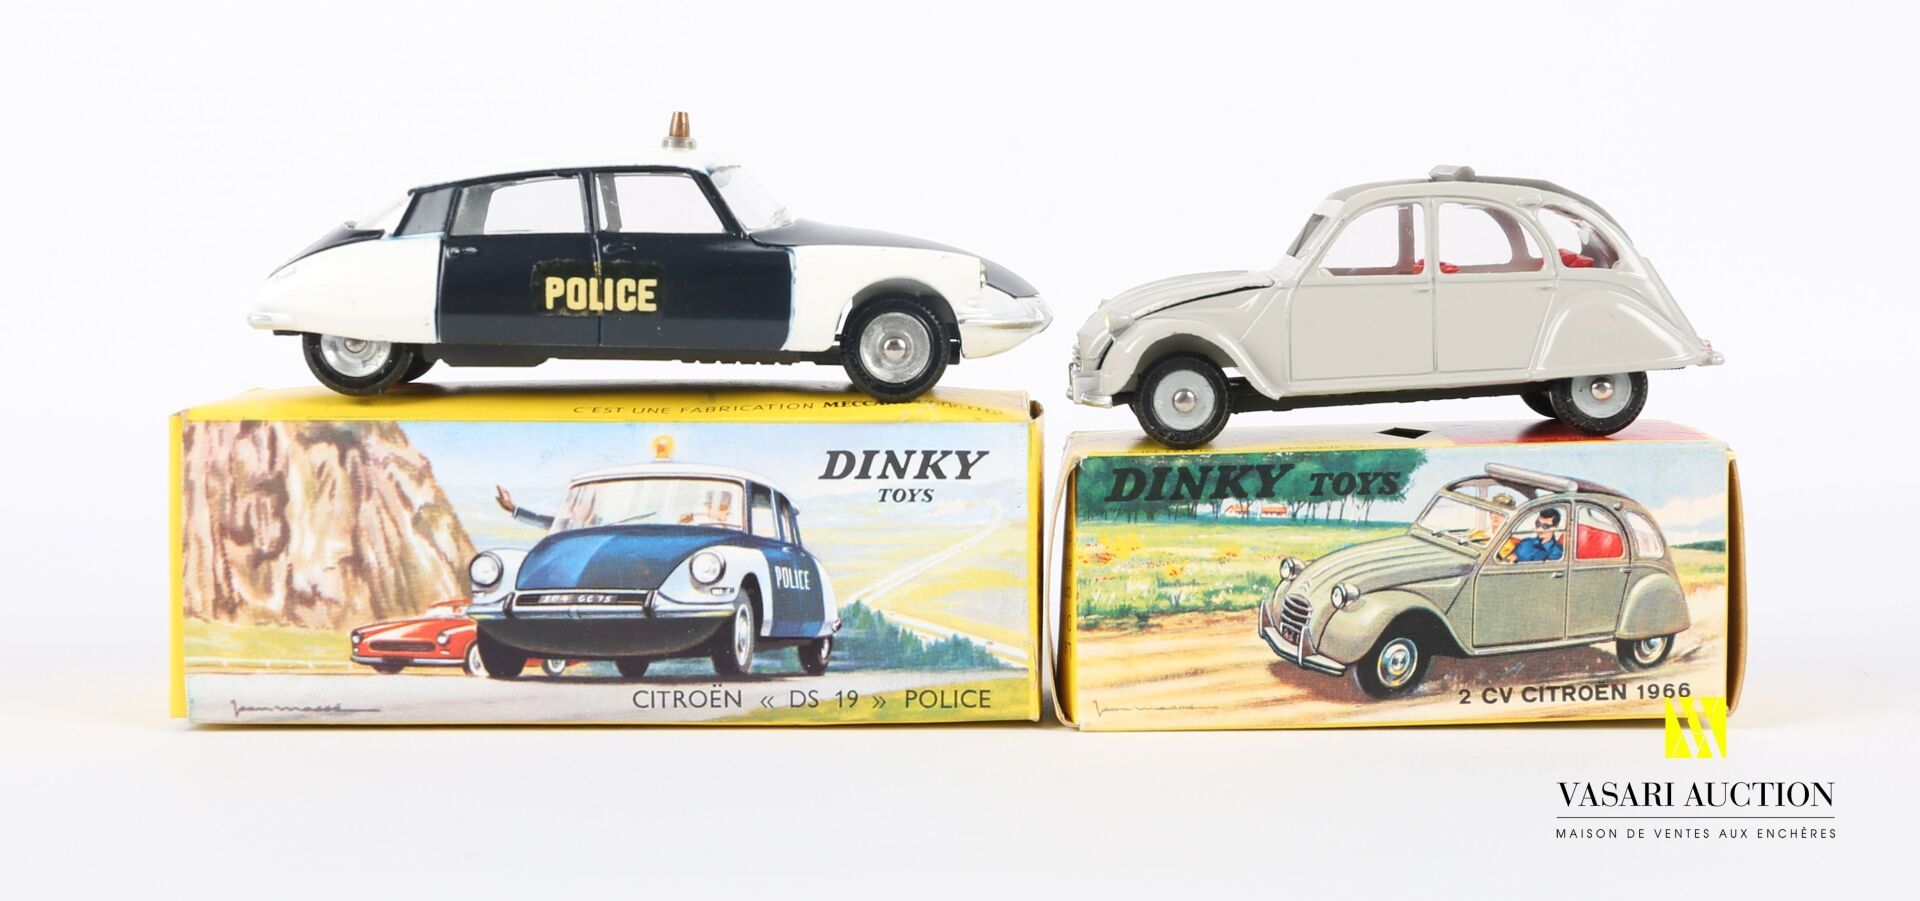 Null DINKY TOYS (FR)

Lot of two vehicles : 2 CV Citroën 1966 Ref 500 - DS 19 Po&hellip;